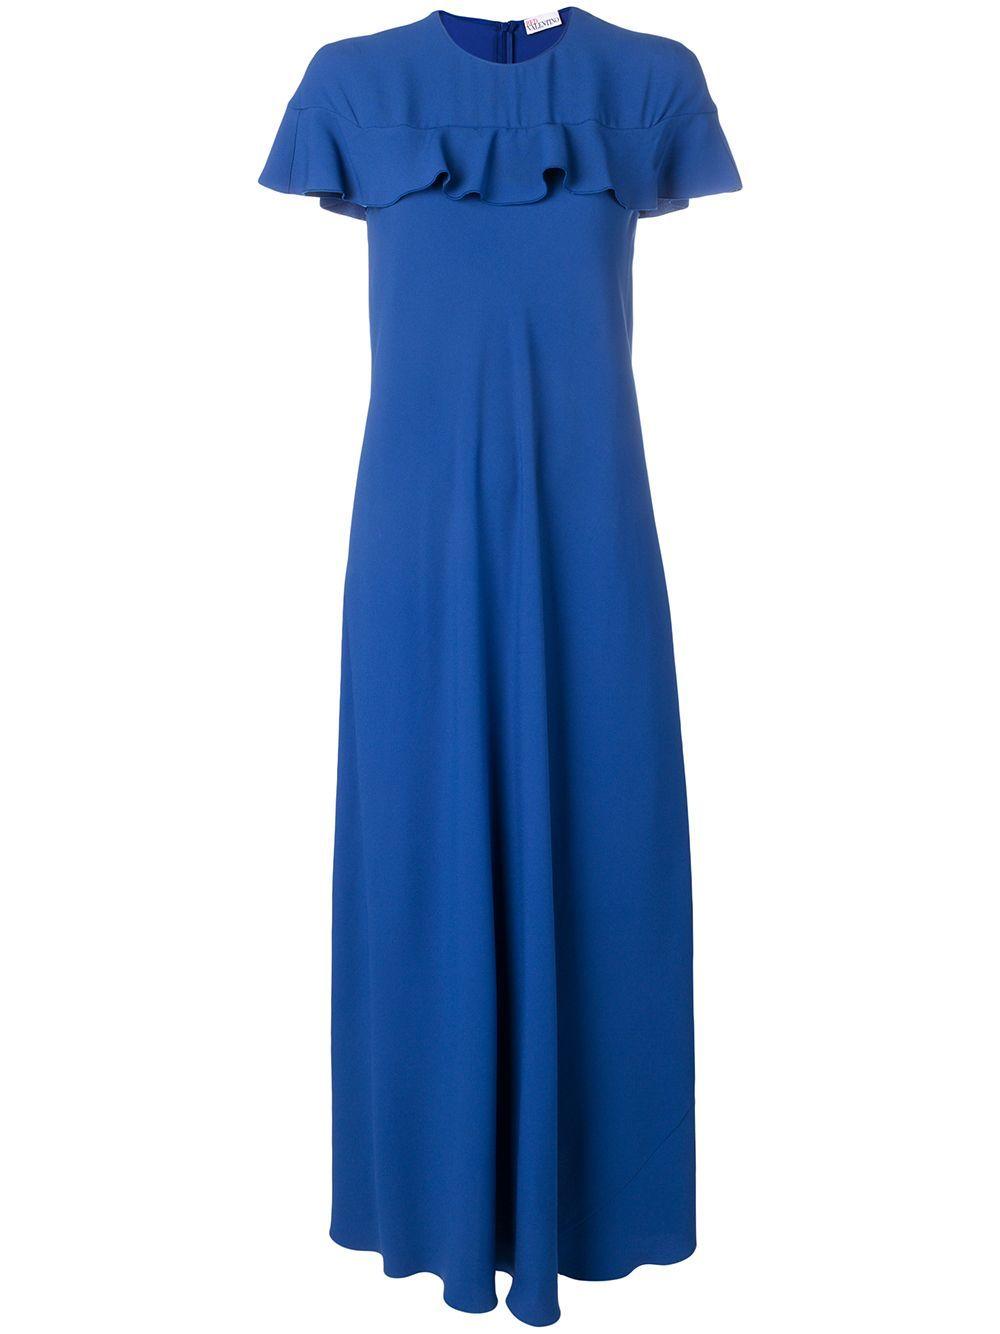 RED Valentino Synthetic Acetate Dress in Blue - Lyst